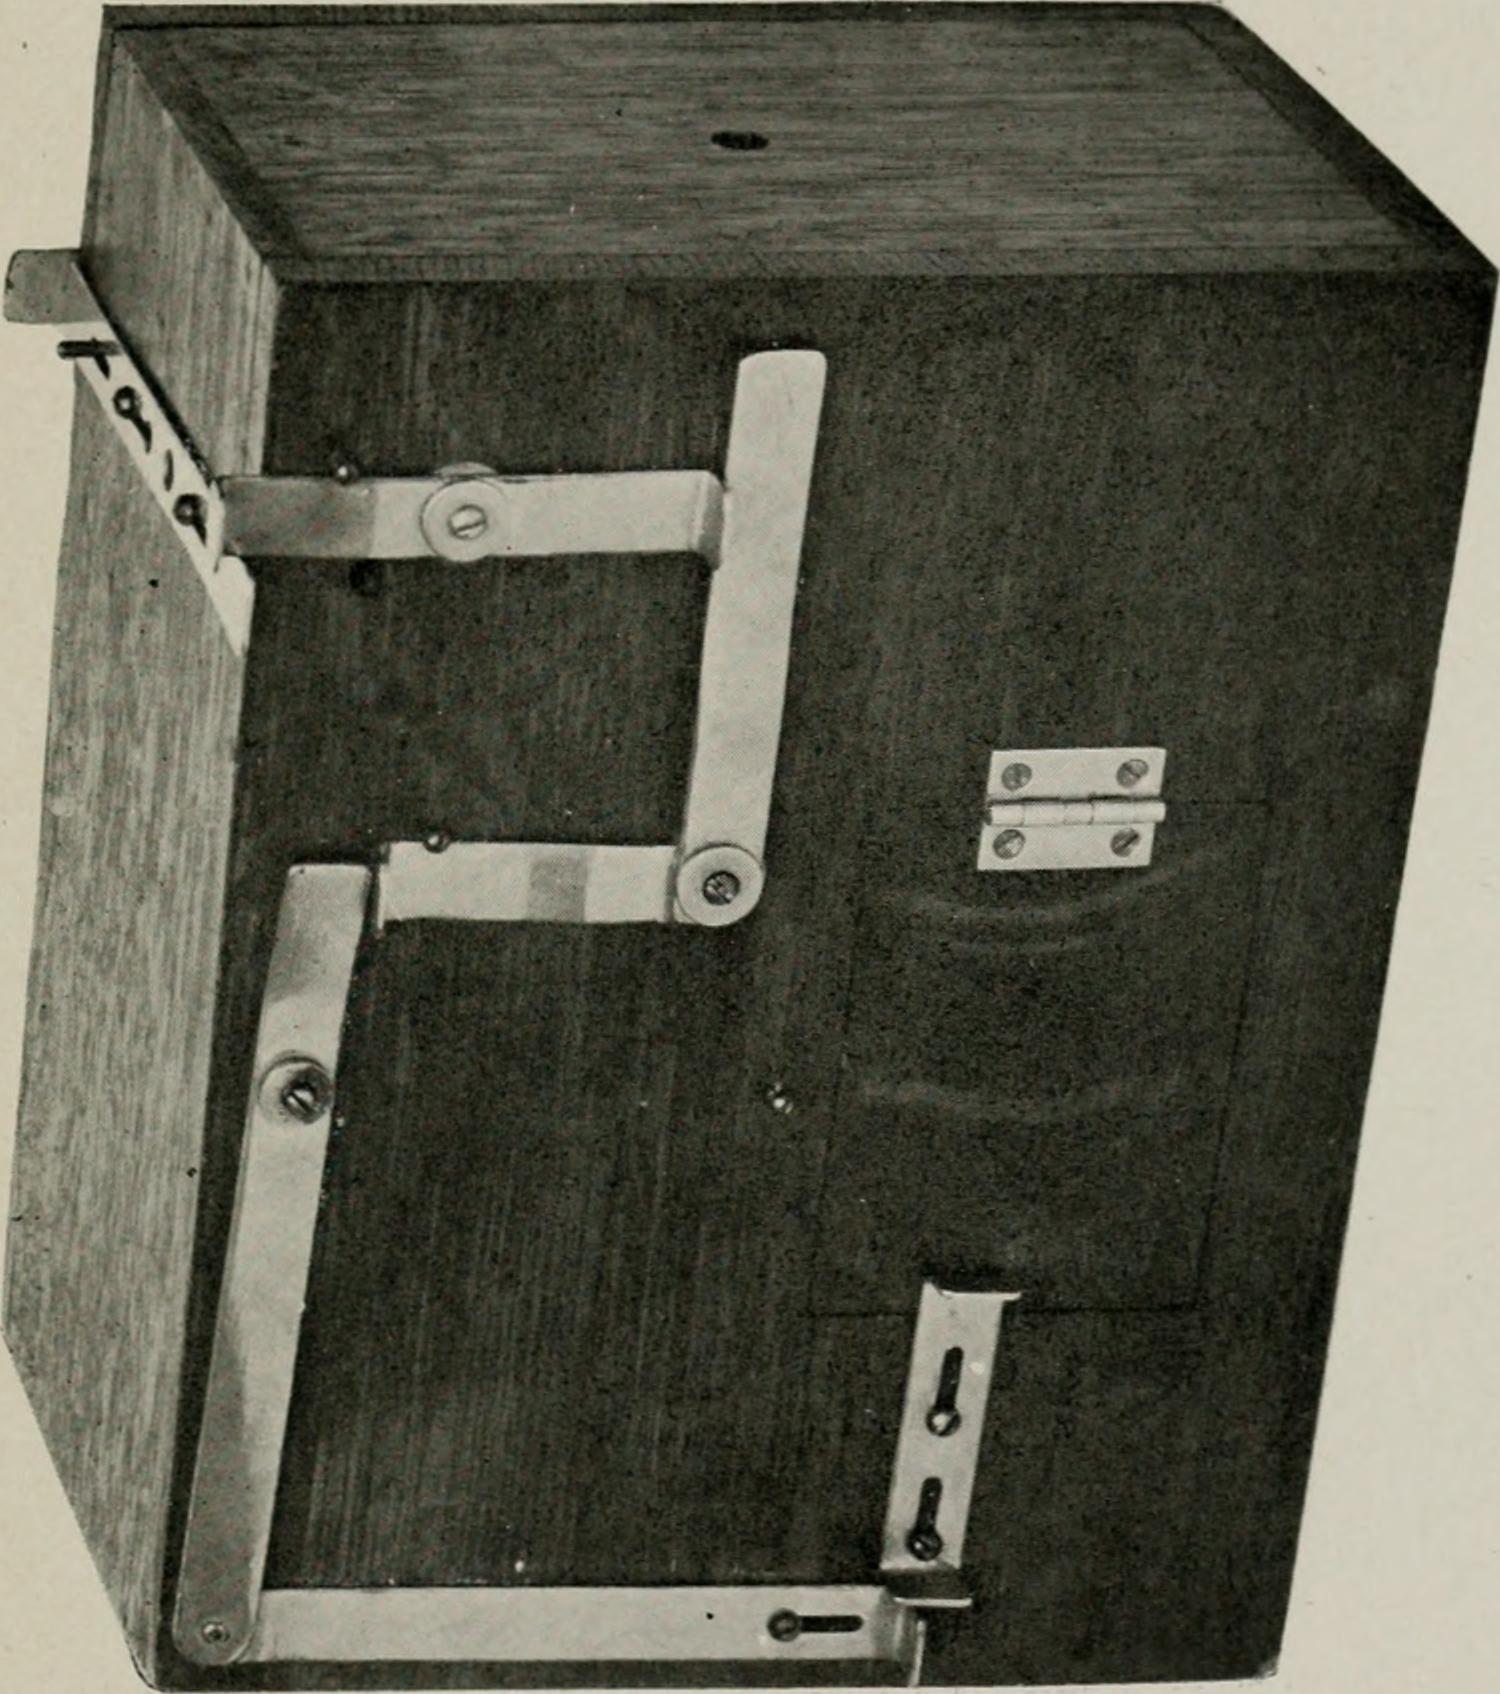 Image from page 68 of "Methods and results of testing school children; manual of tests used by the psychological survey in the public schools of New York city, including social and physical studies of the children tested" (1920)